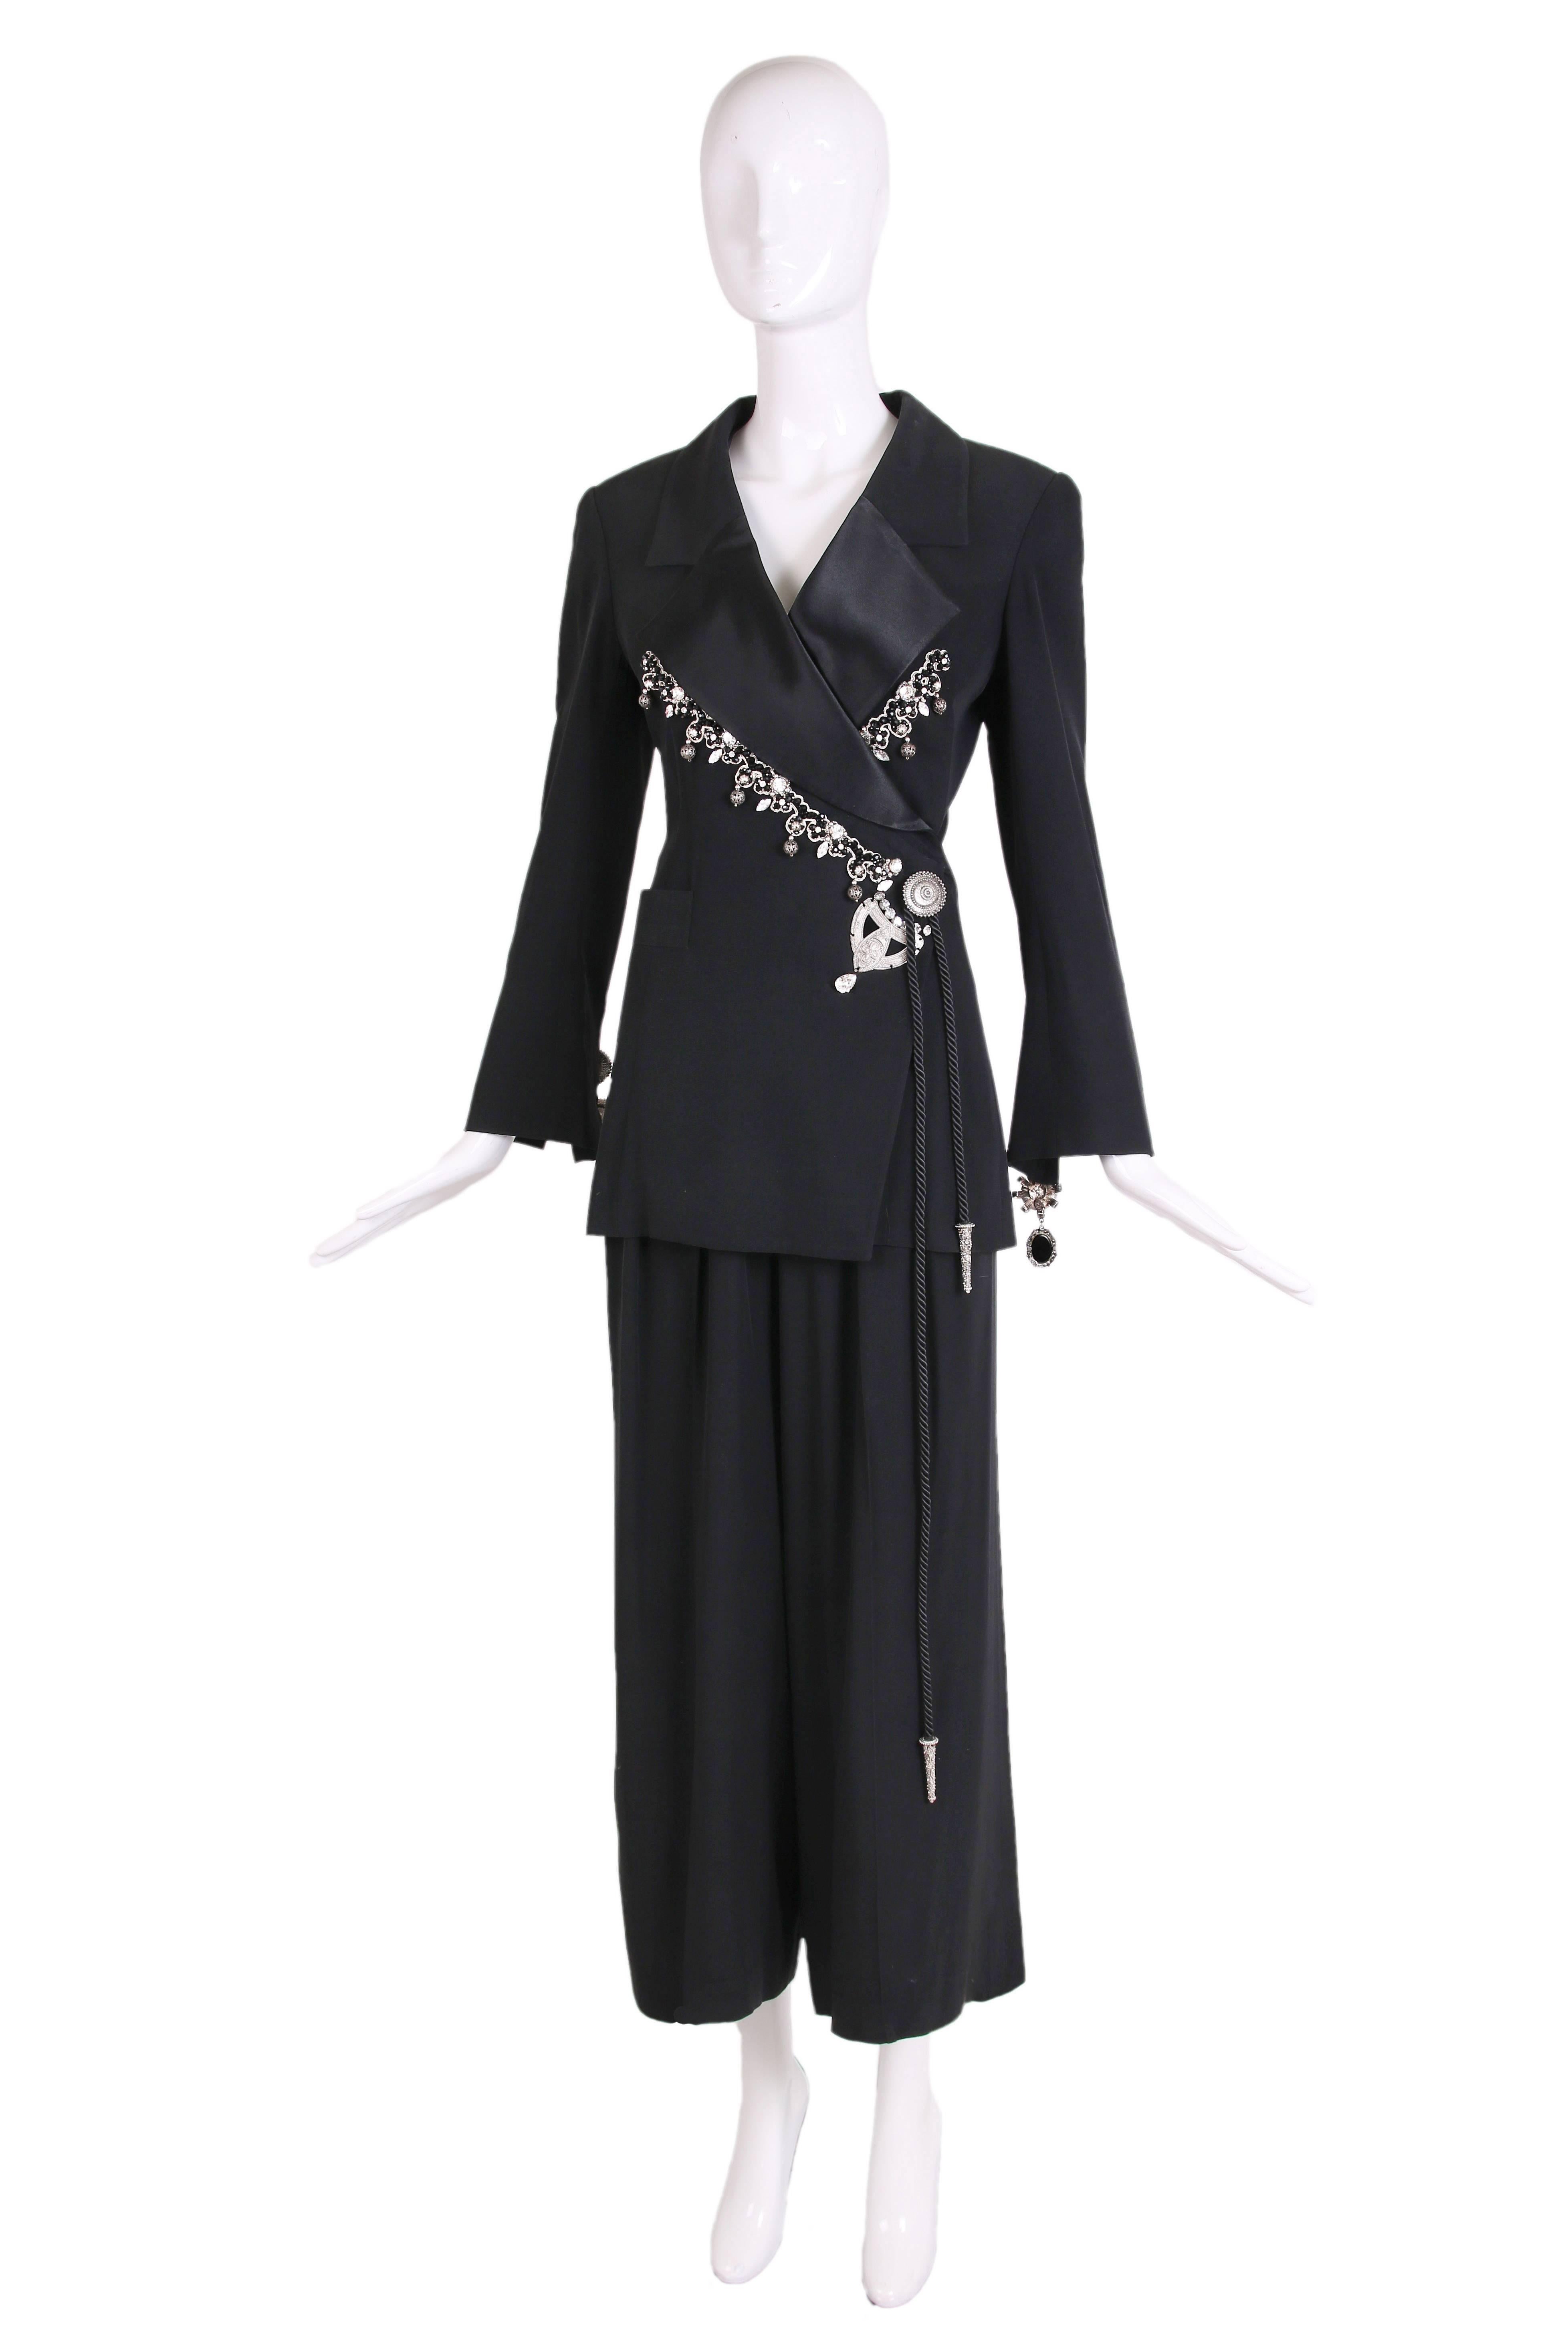 1994 Christian Dior by Gianfranco Ferre black tuxedo wrap jacket with metal and rhinestone embellishments as well as attached silk cord wrap at waist and high-waisted, pleated matching pants. In excellent condition. Jacket is size 36 and pants are a